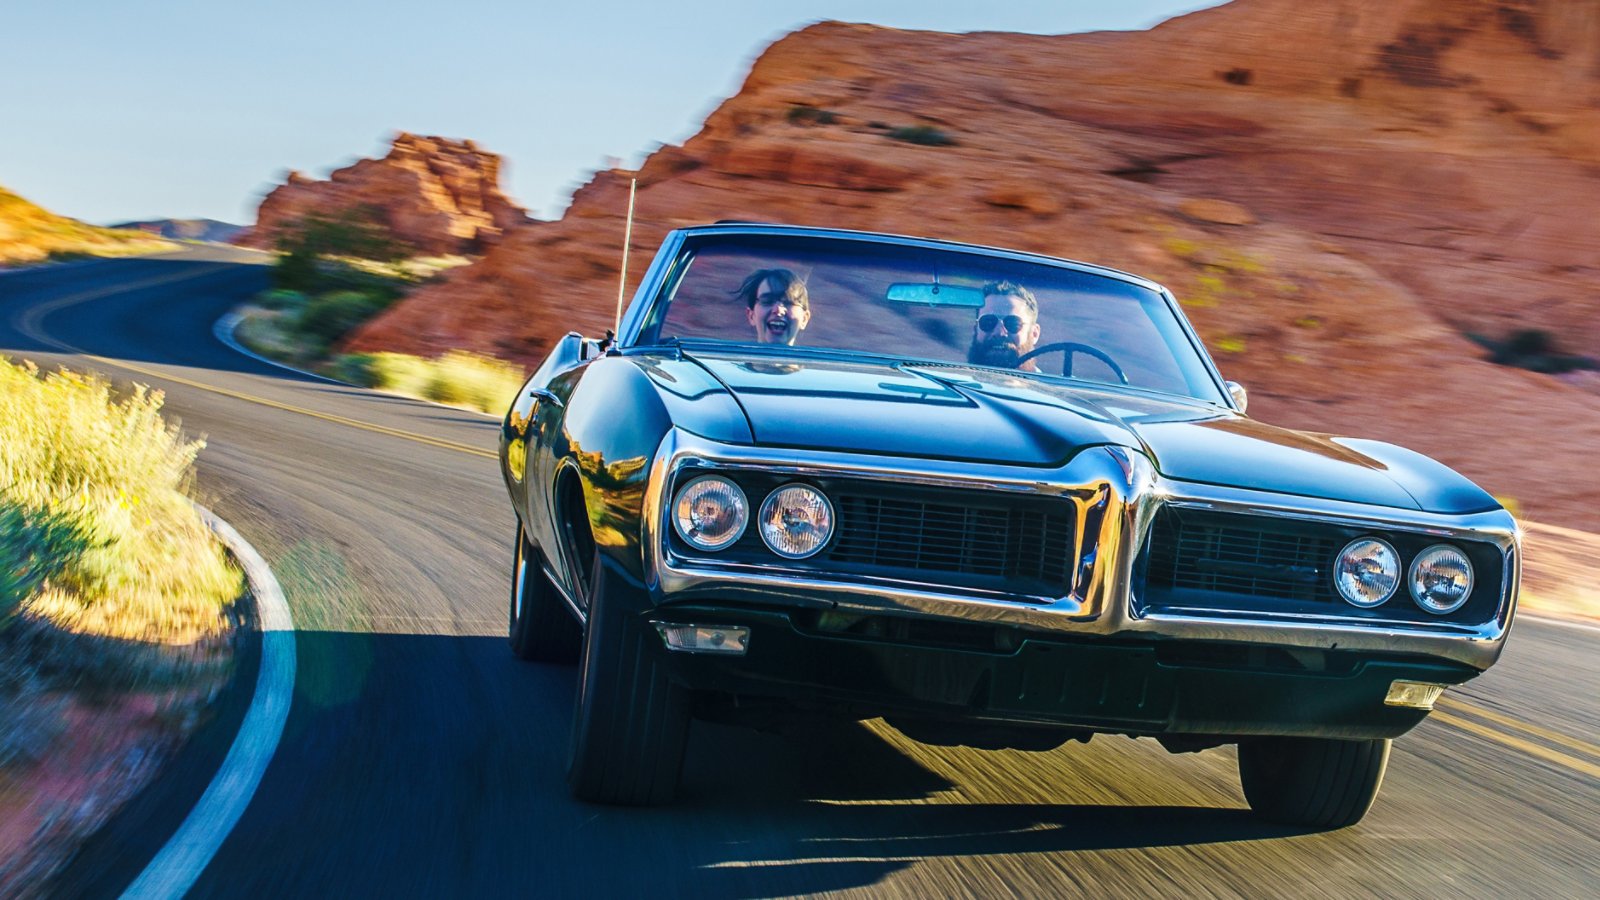 couple driving together in cool vintage car through desert